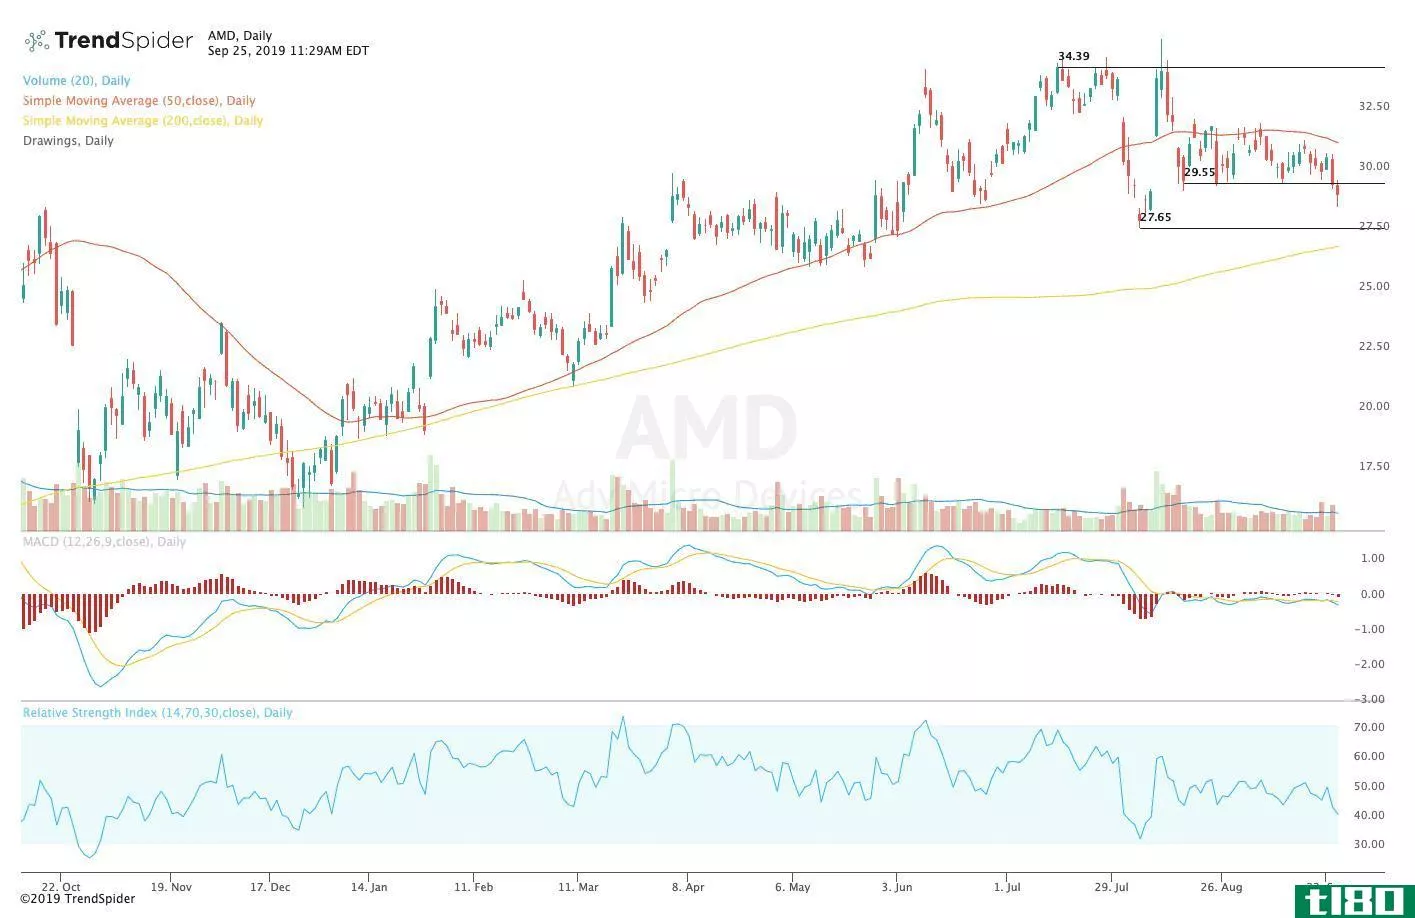 Chart showing the share price performance of Advanced Micro Devices, Inc. (AMD)